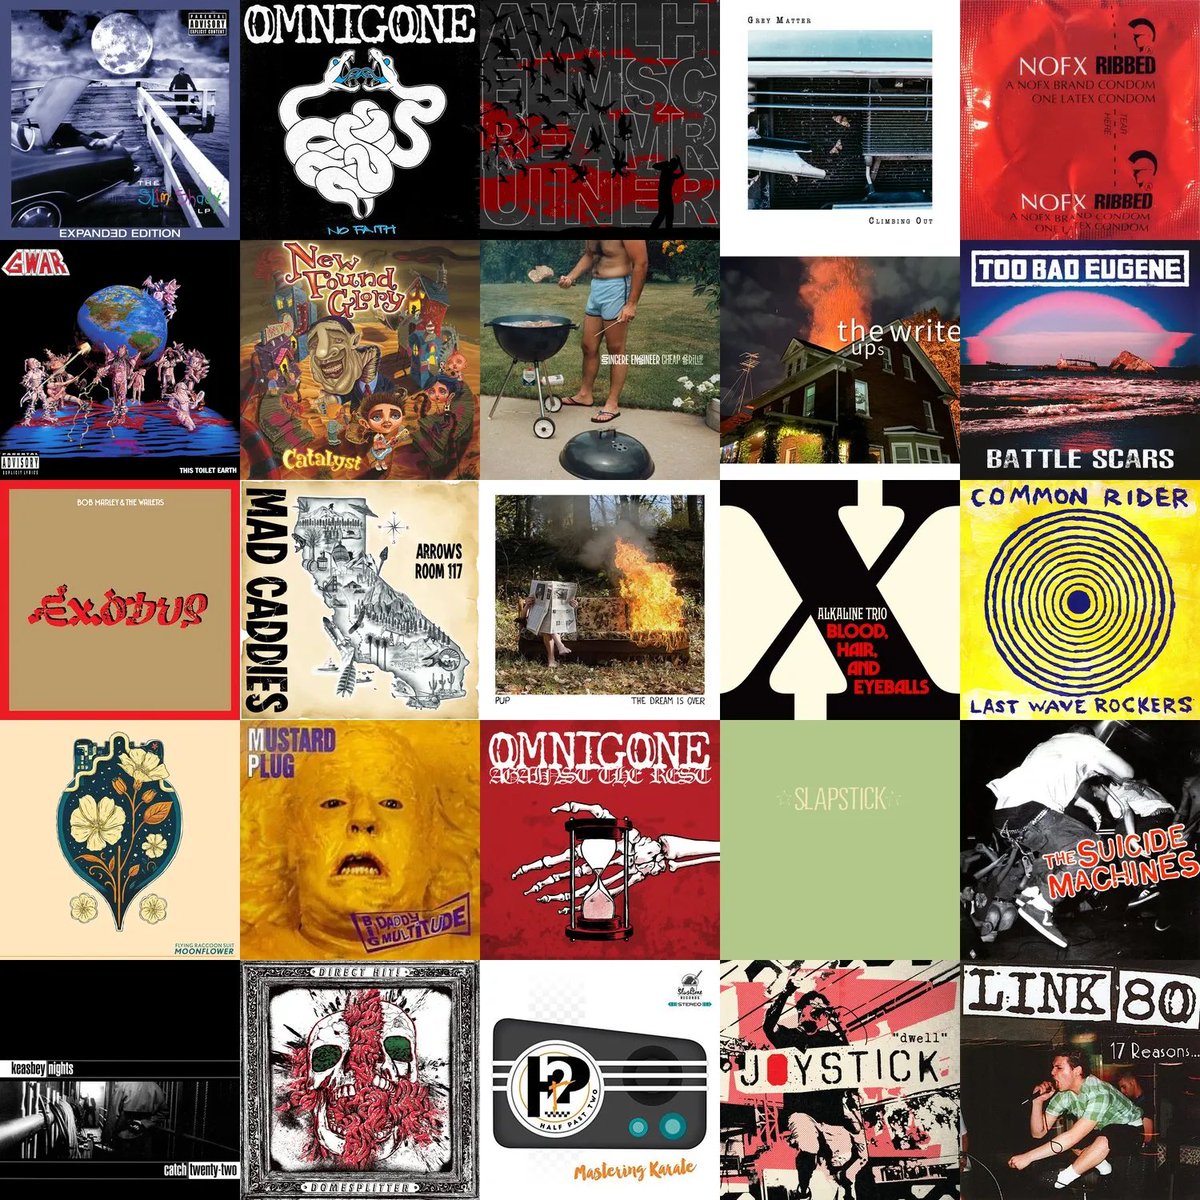 This week’s music! Friday 5x5